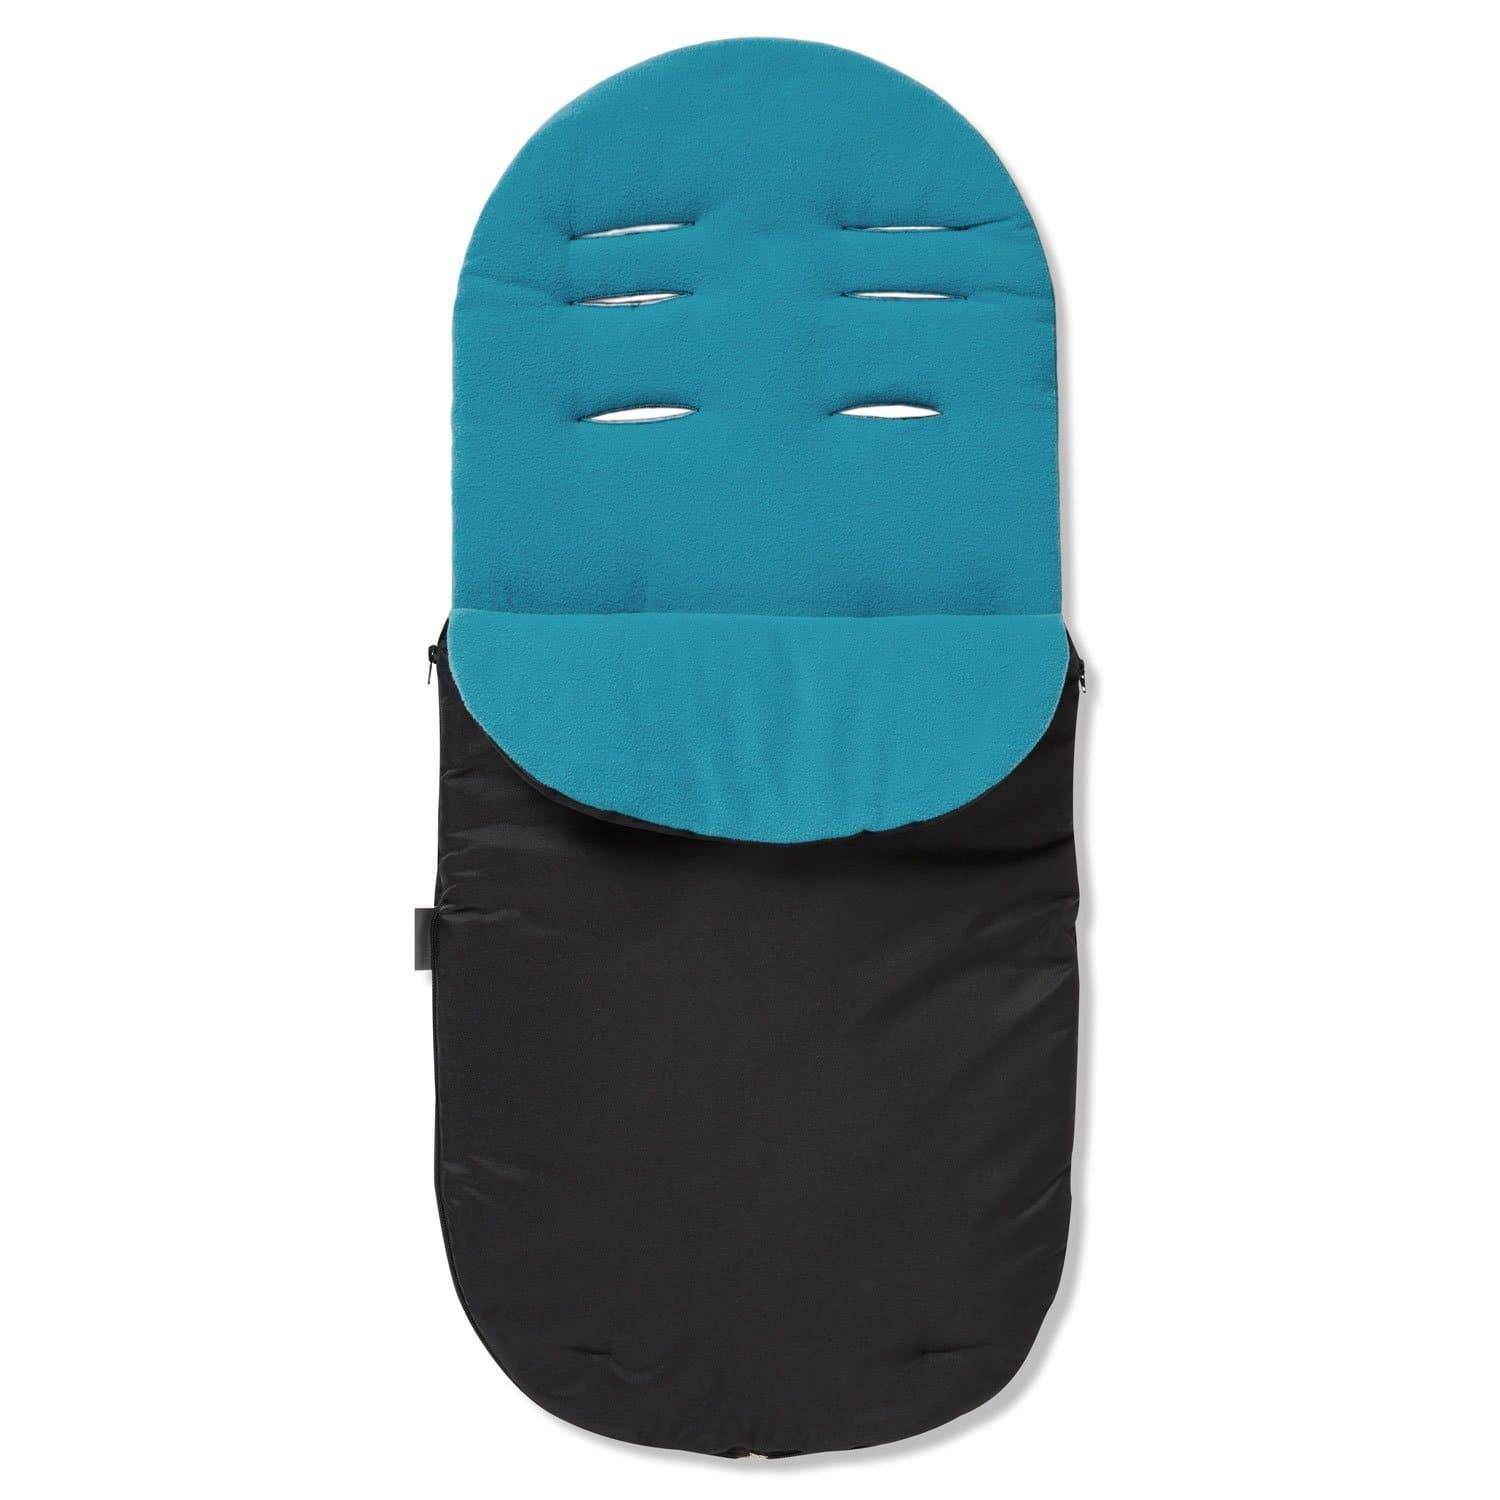 Footmuff / Cosy Toes Compatible with Venicci - Turquoise / Fits All Models | For Your Little One